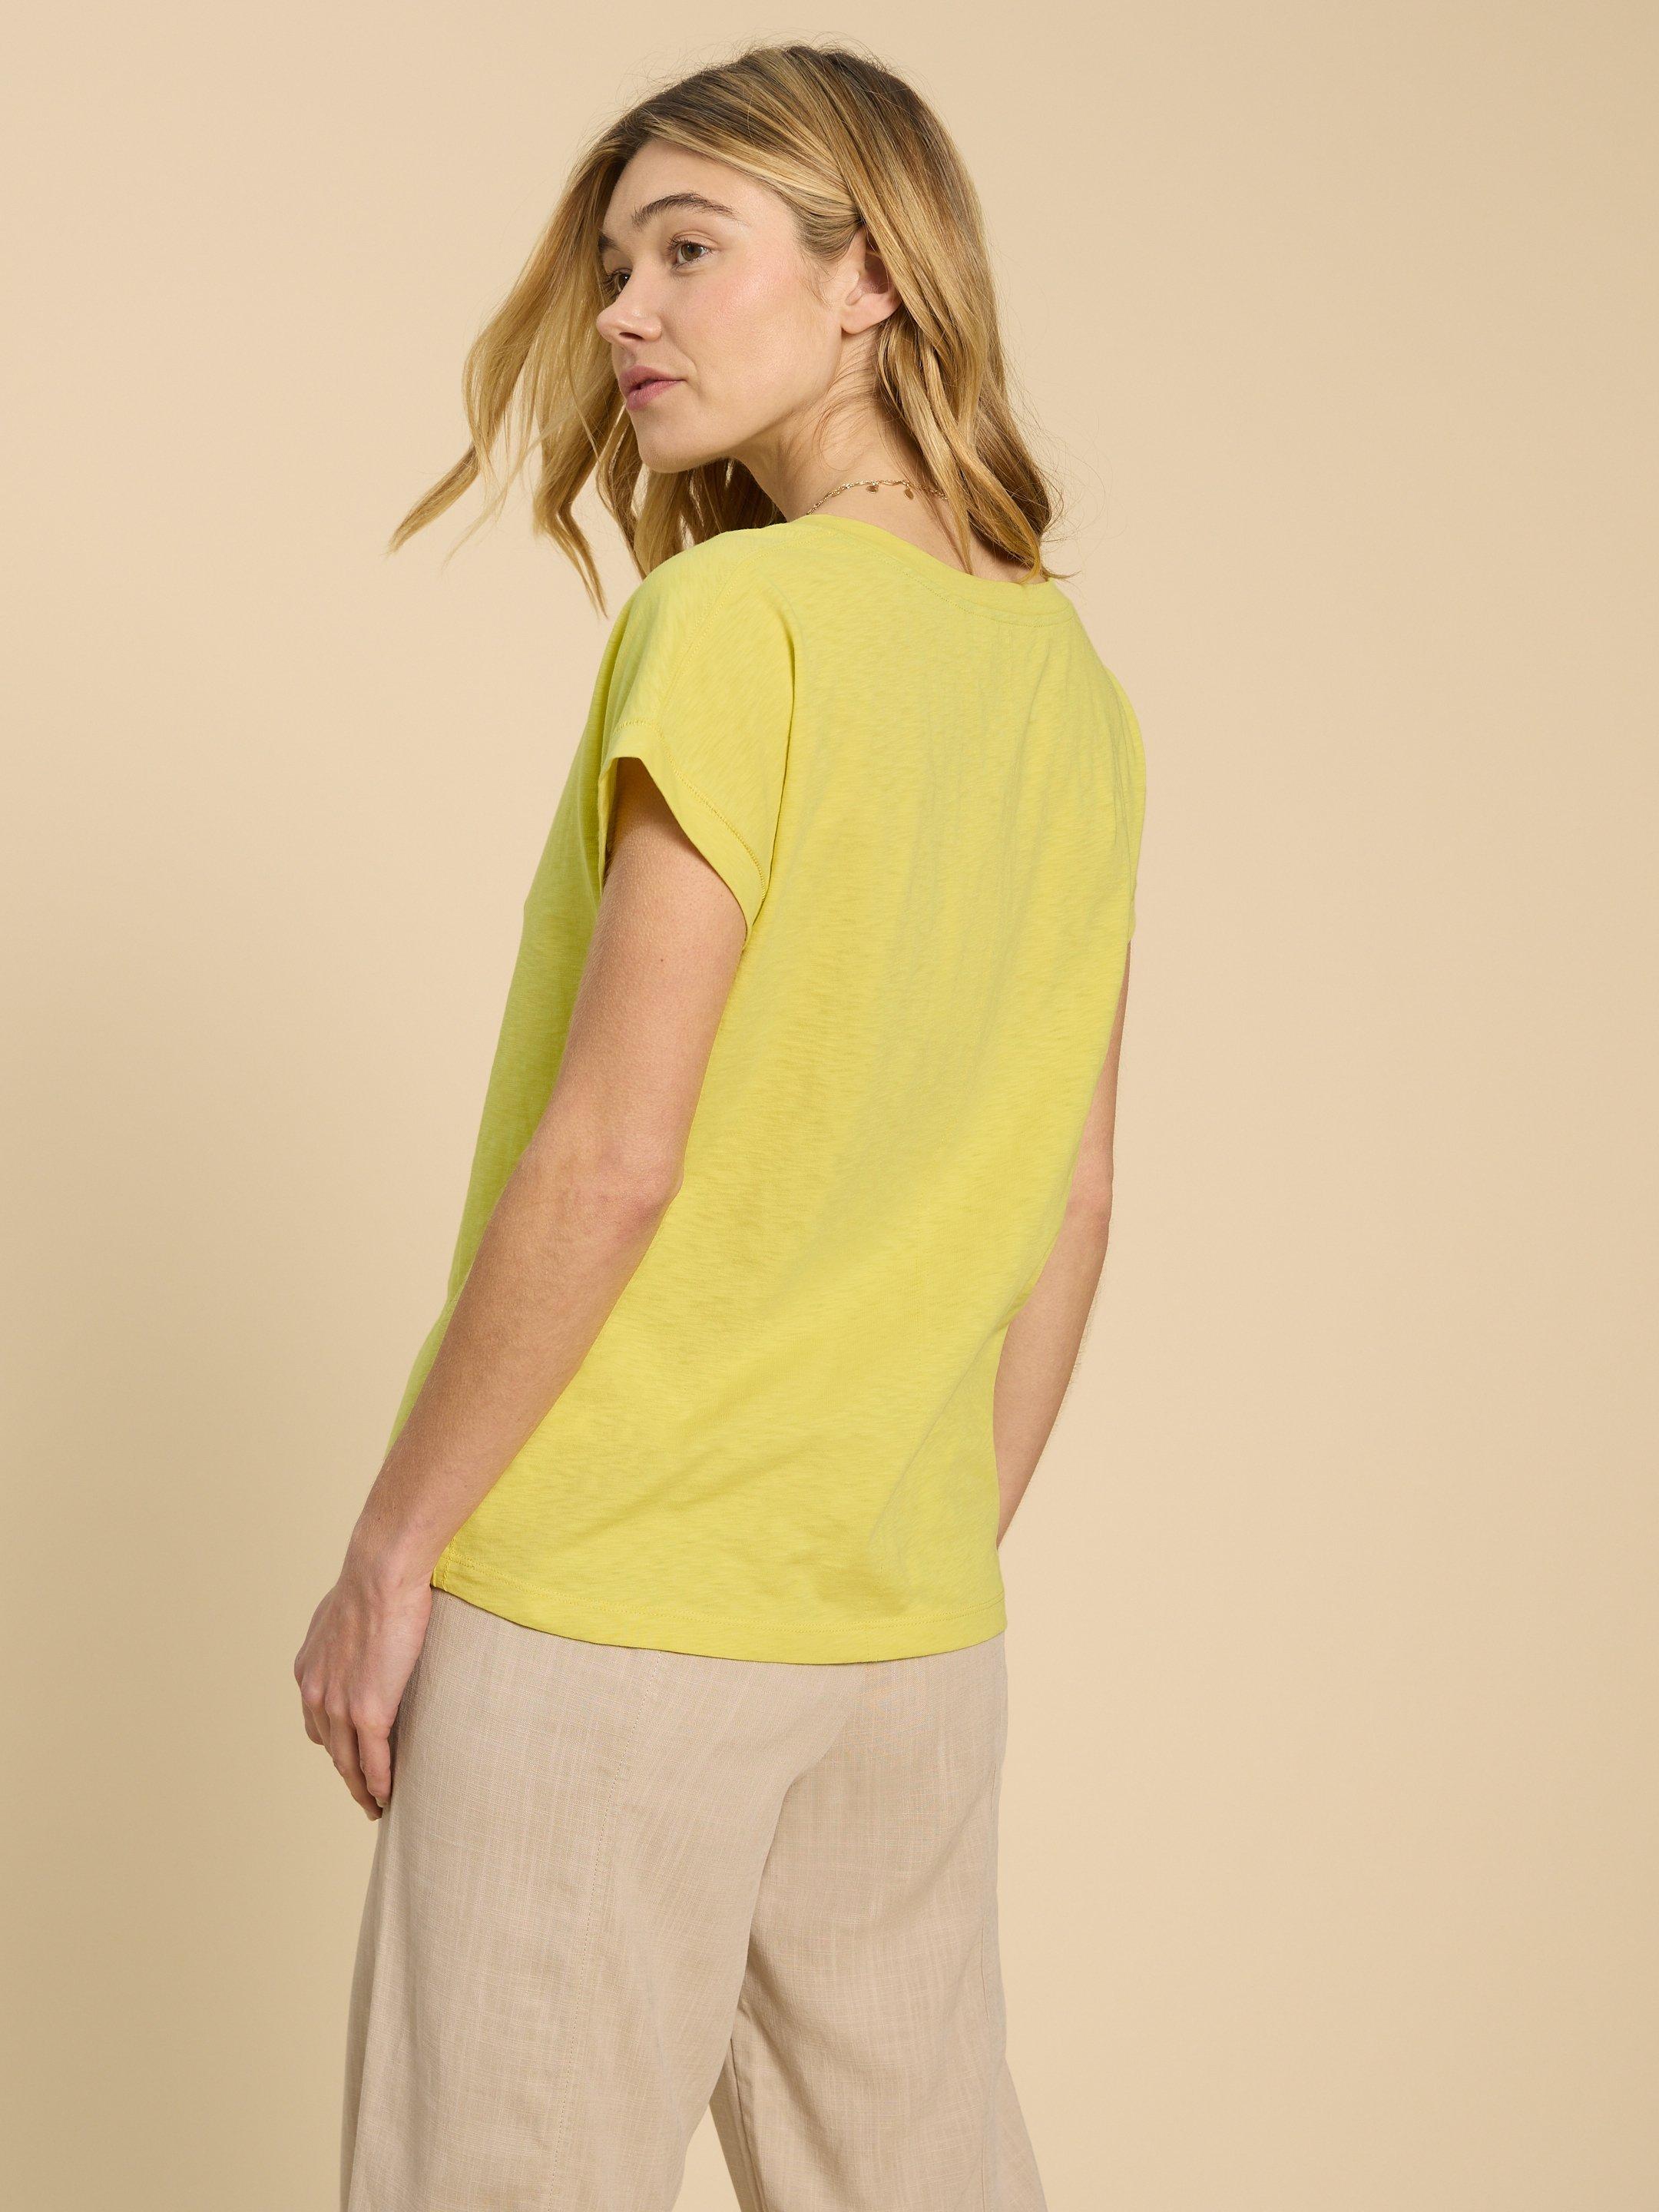 NELLY NOTCH NECK COTTON TEE in BRT YELLOW - MODEL BACK